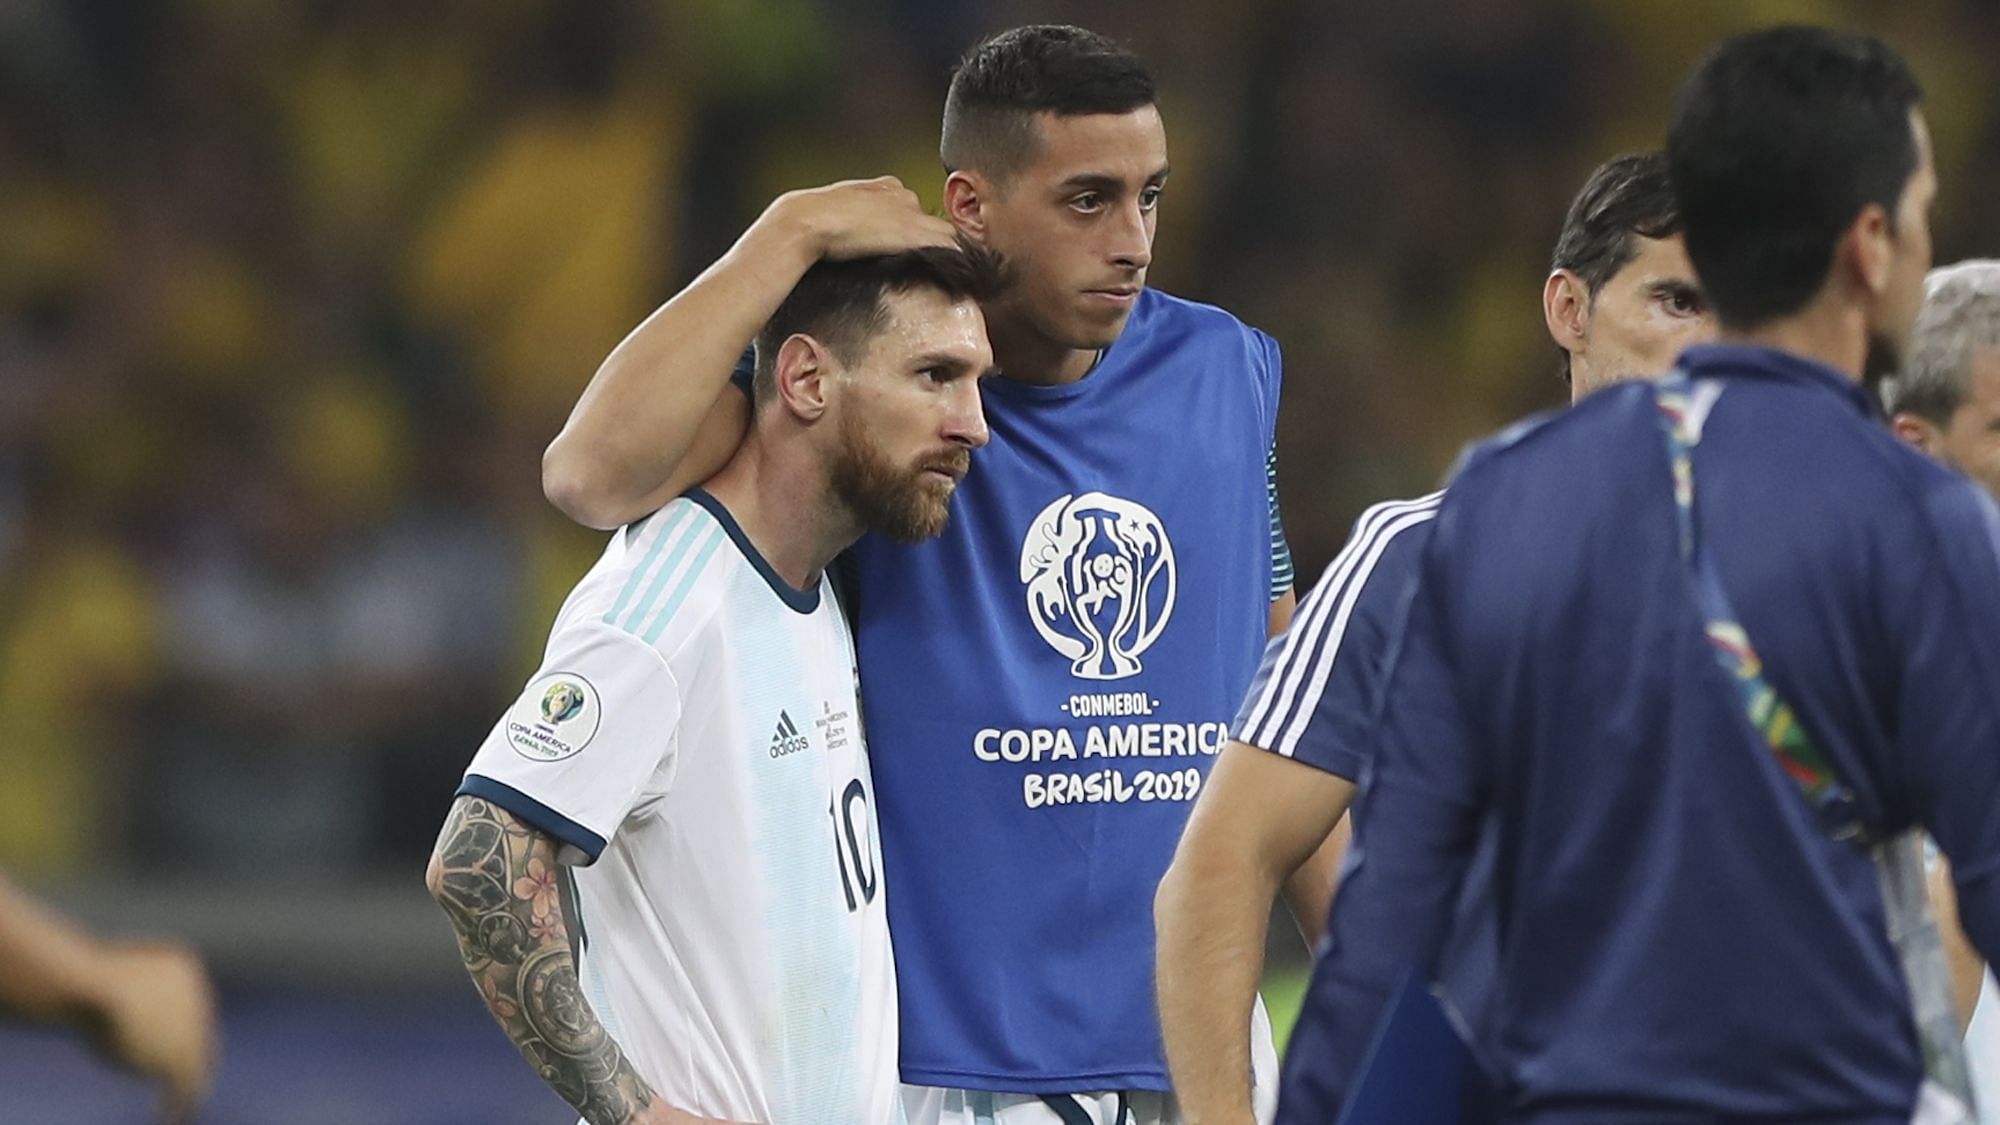 A teammate embraces Argentina’s Lionel Messi after losing 0-2 to Brazil in a Copa America semifinal soccer match at the Mineirao stadium in Belo Horizonte, Brazil.